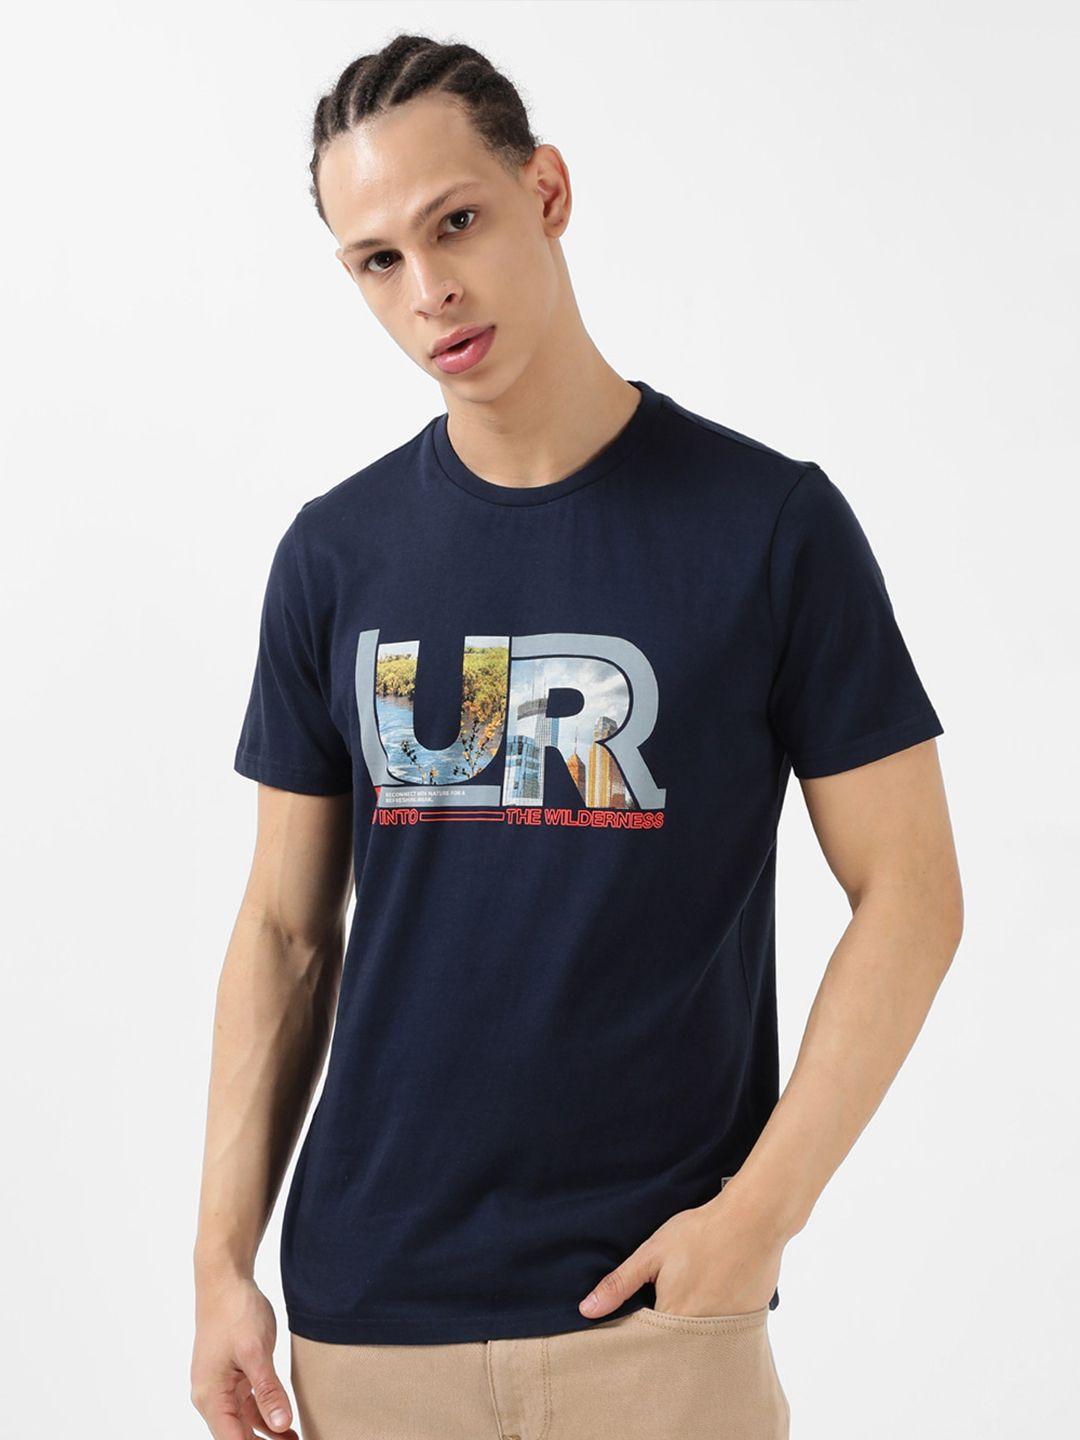 lee typography printed cotton t-shirt